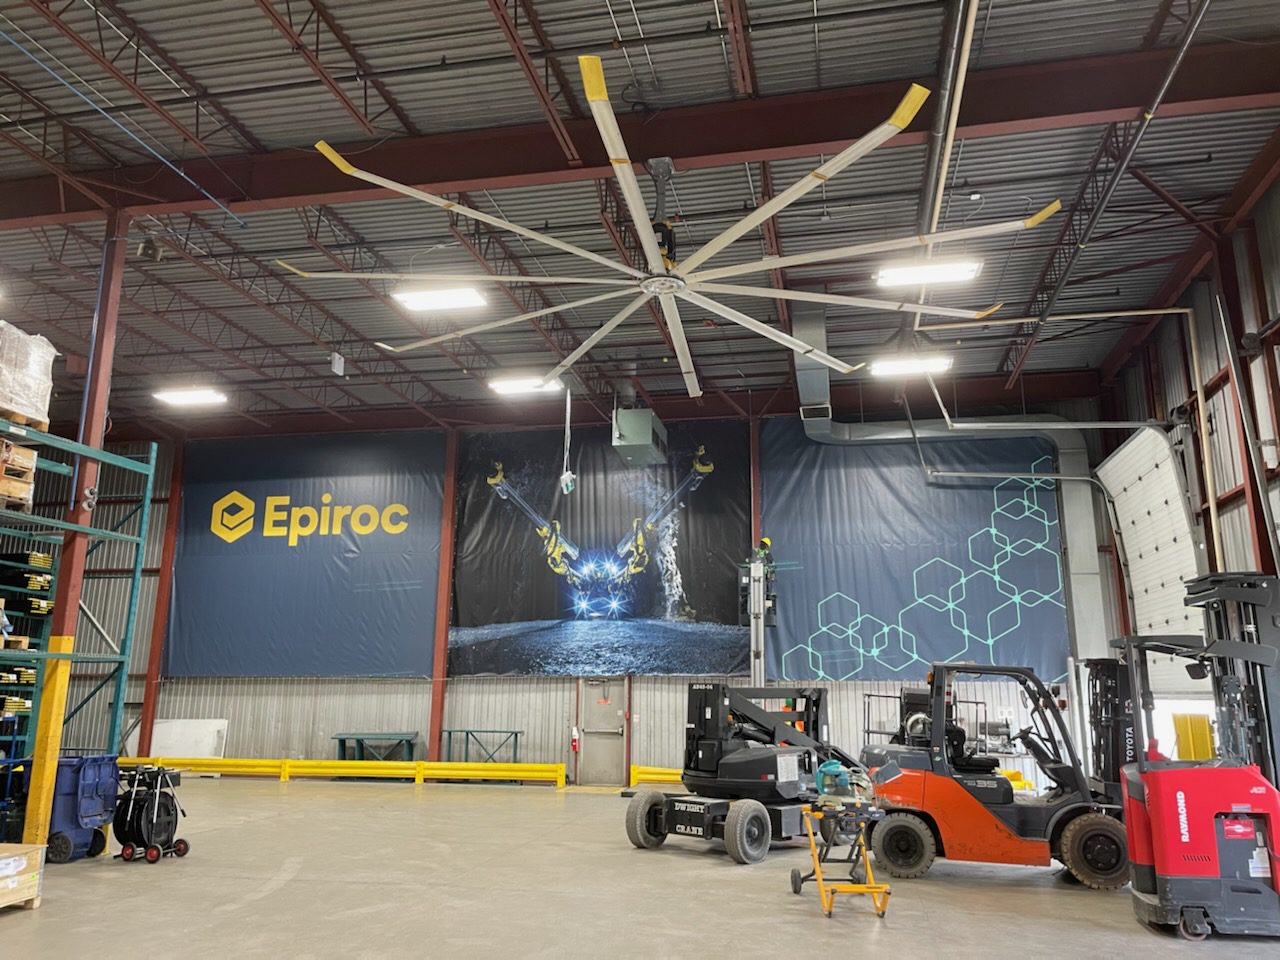 Epiroc Vinyl Printed Banners on the Wall in Concord, ON